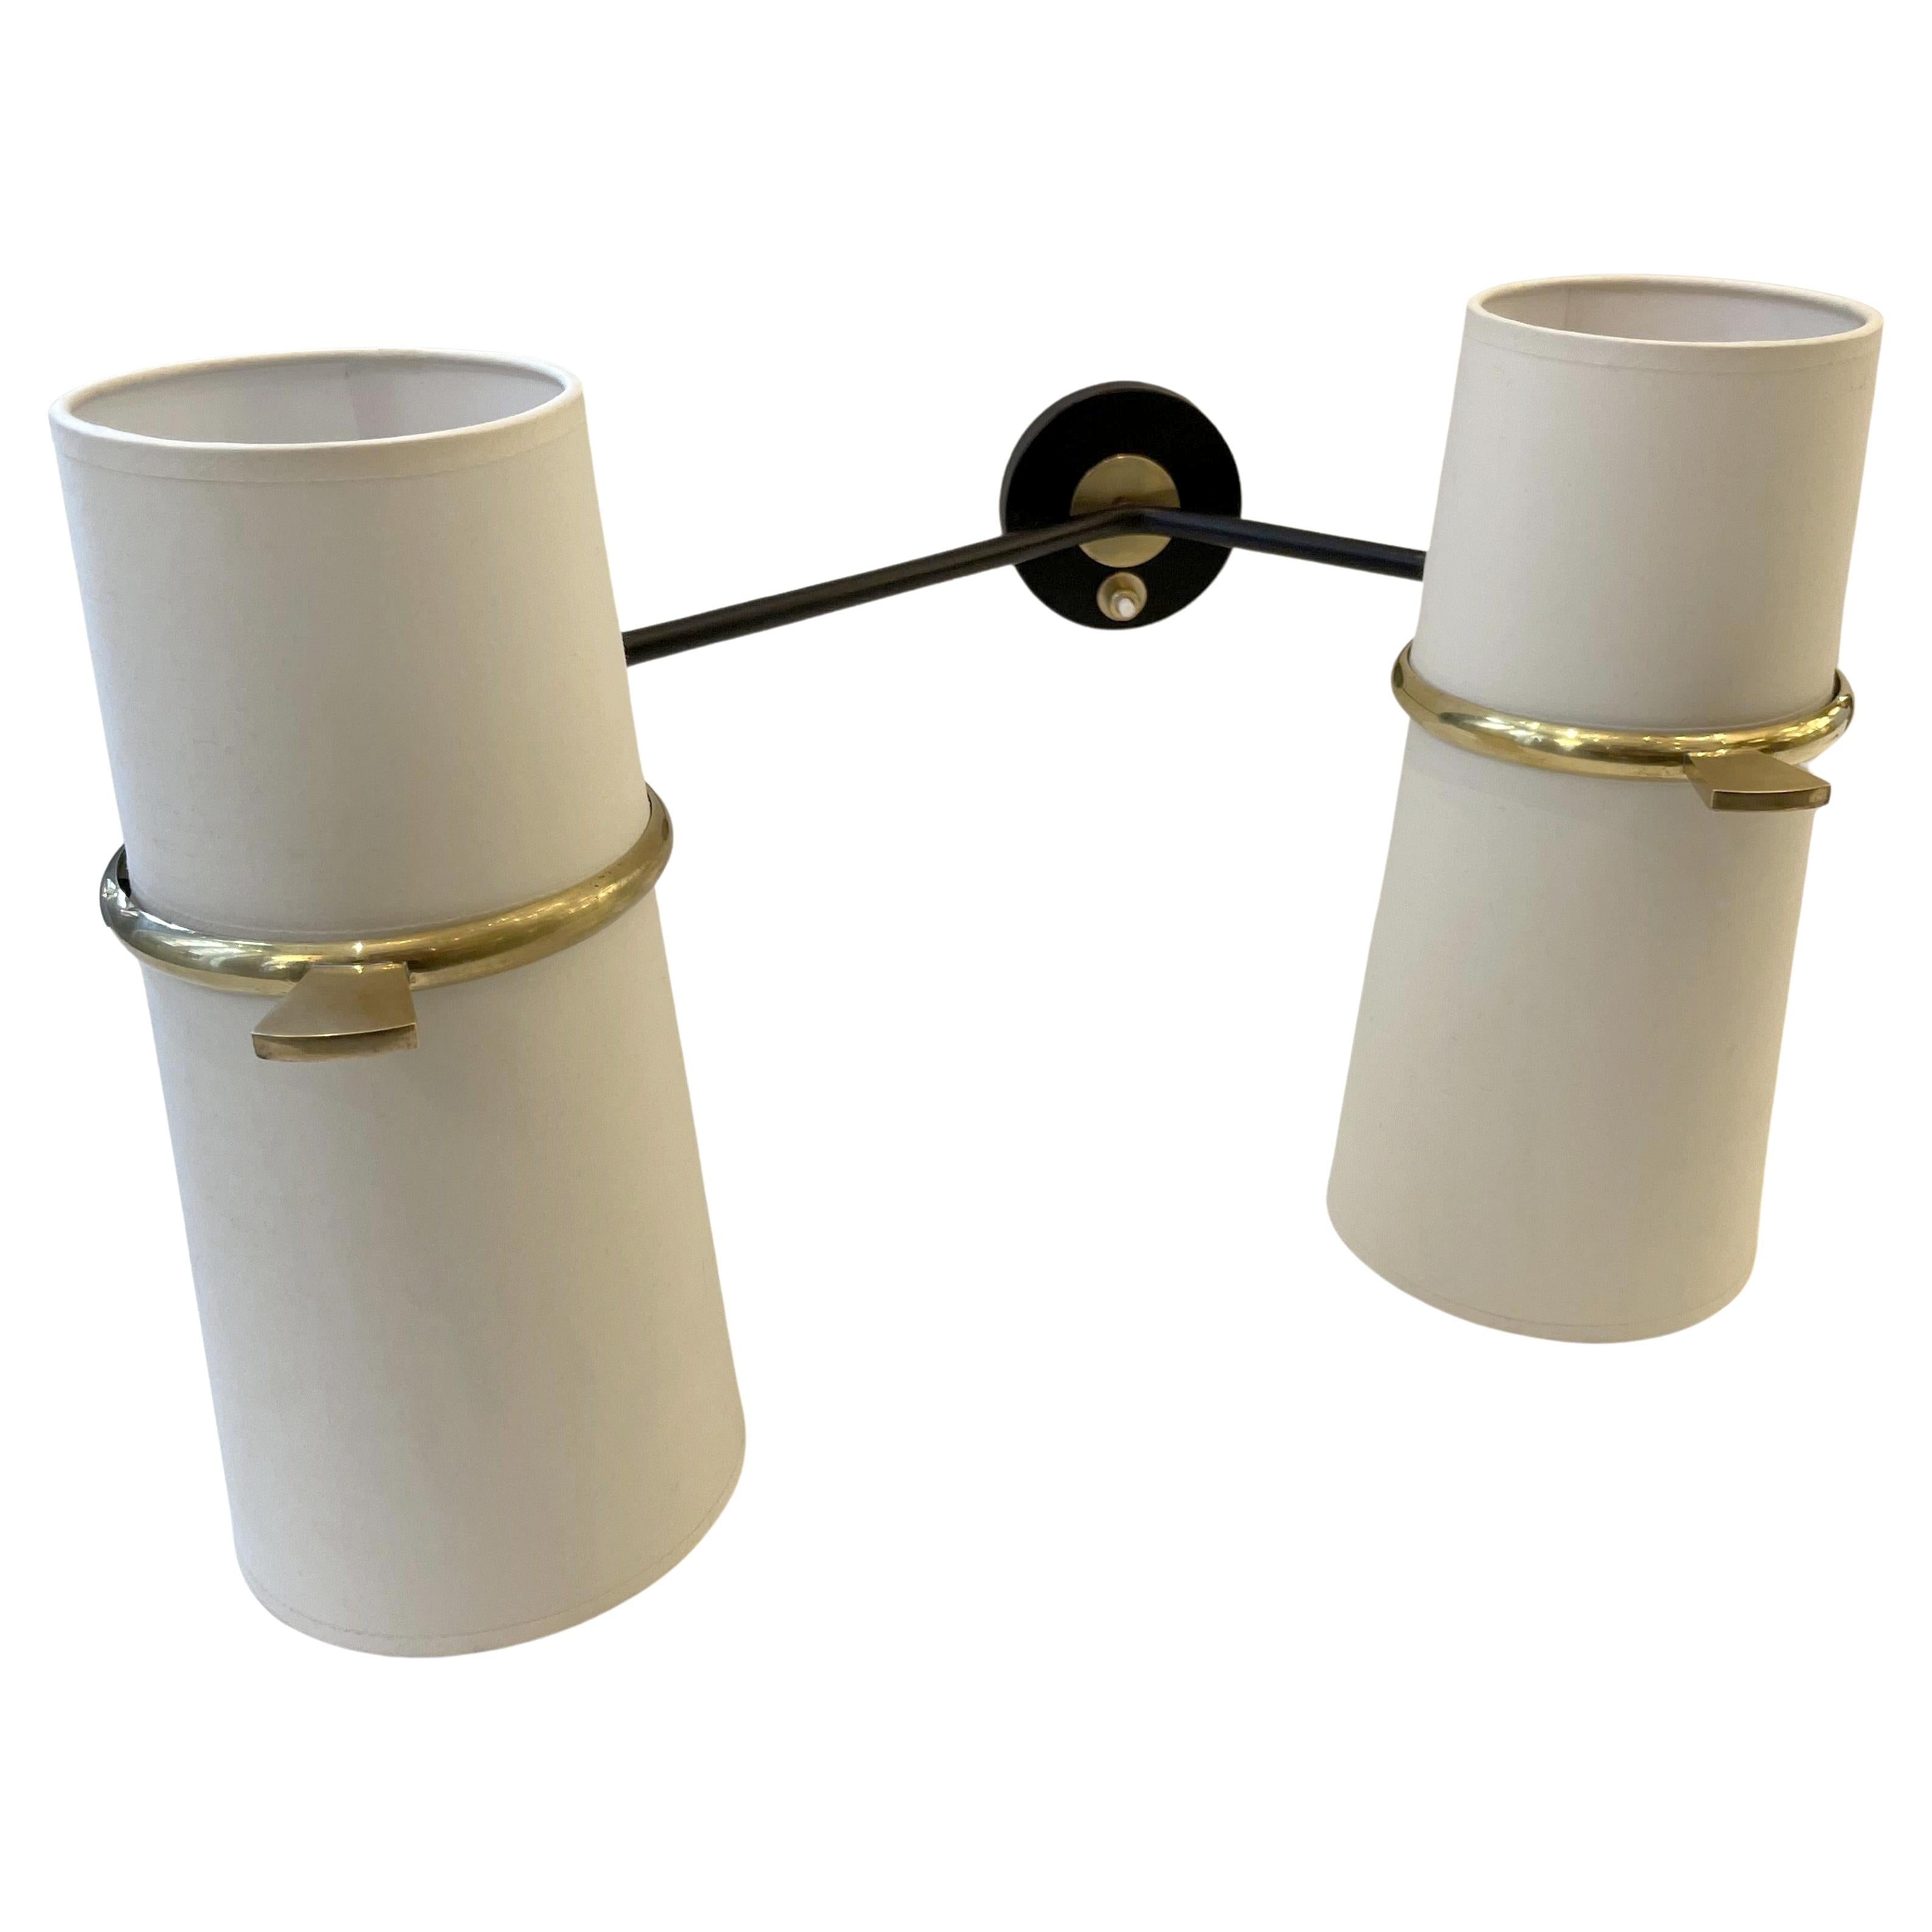 Rare pair of double-light adjustable sconces from Maison Lunel, France circa 1950.
Two arms fitted with ball joints, each supporting a double shade in off-white cotton and two electric bulbs.
Black lacquered wrought iron and polished